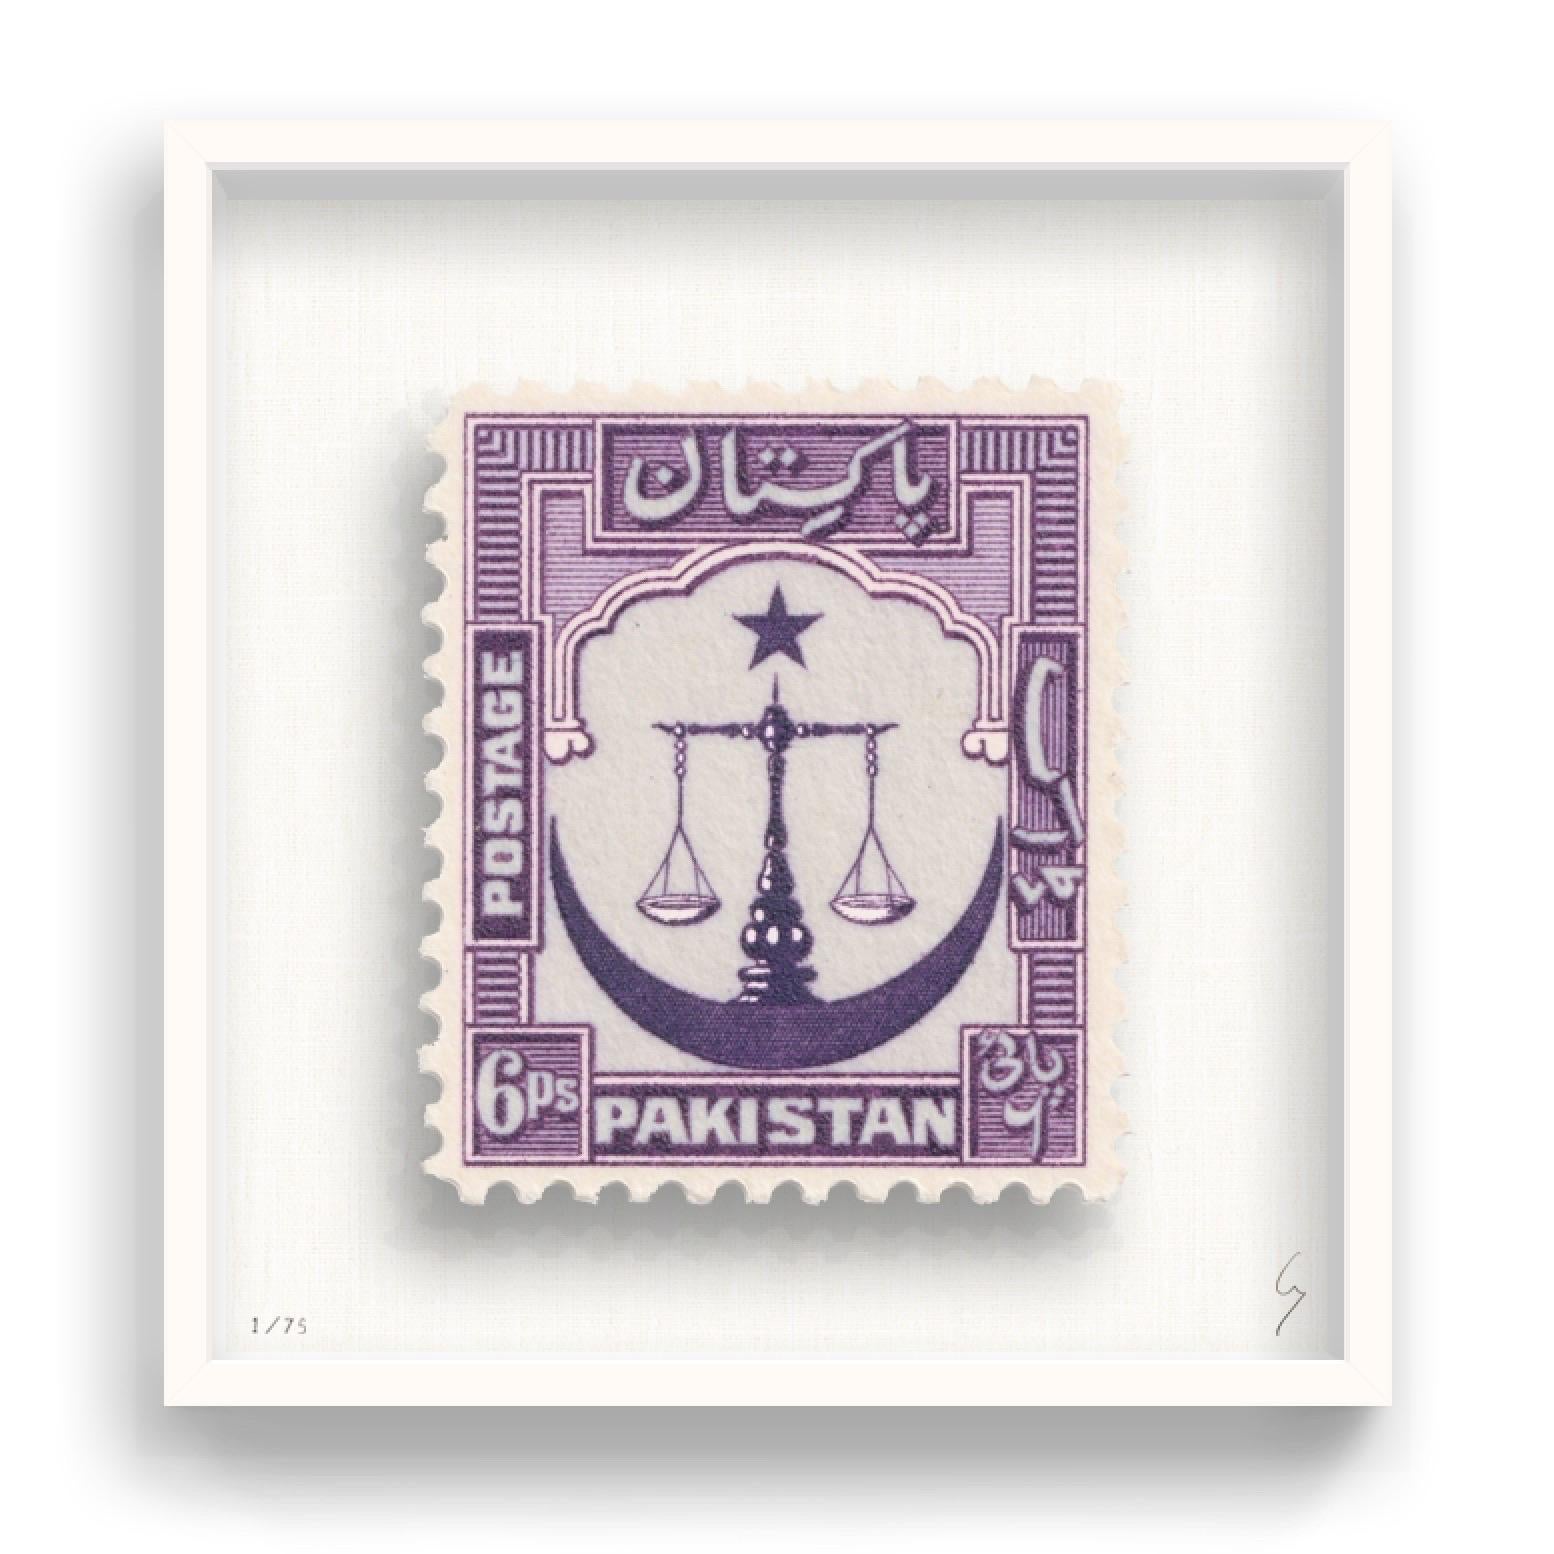 Guy Gee, Pakistan (medium)

Hand-engraved print on 350gsm on G.F Smith card
31 x 35 cm (12 1/5 x 13 4/5)
Frame included 
Edition of 75 

Each artwork by Guy had been digitally reimagined from an original postage stamp. Cut out and finished by hand,